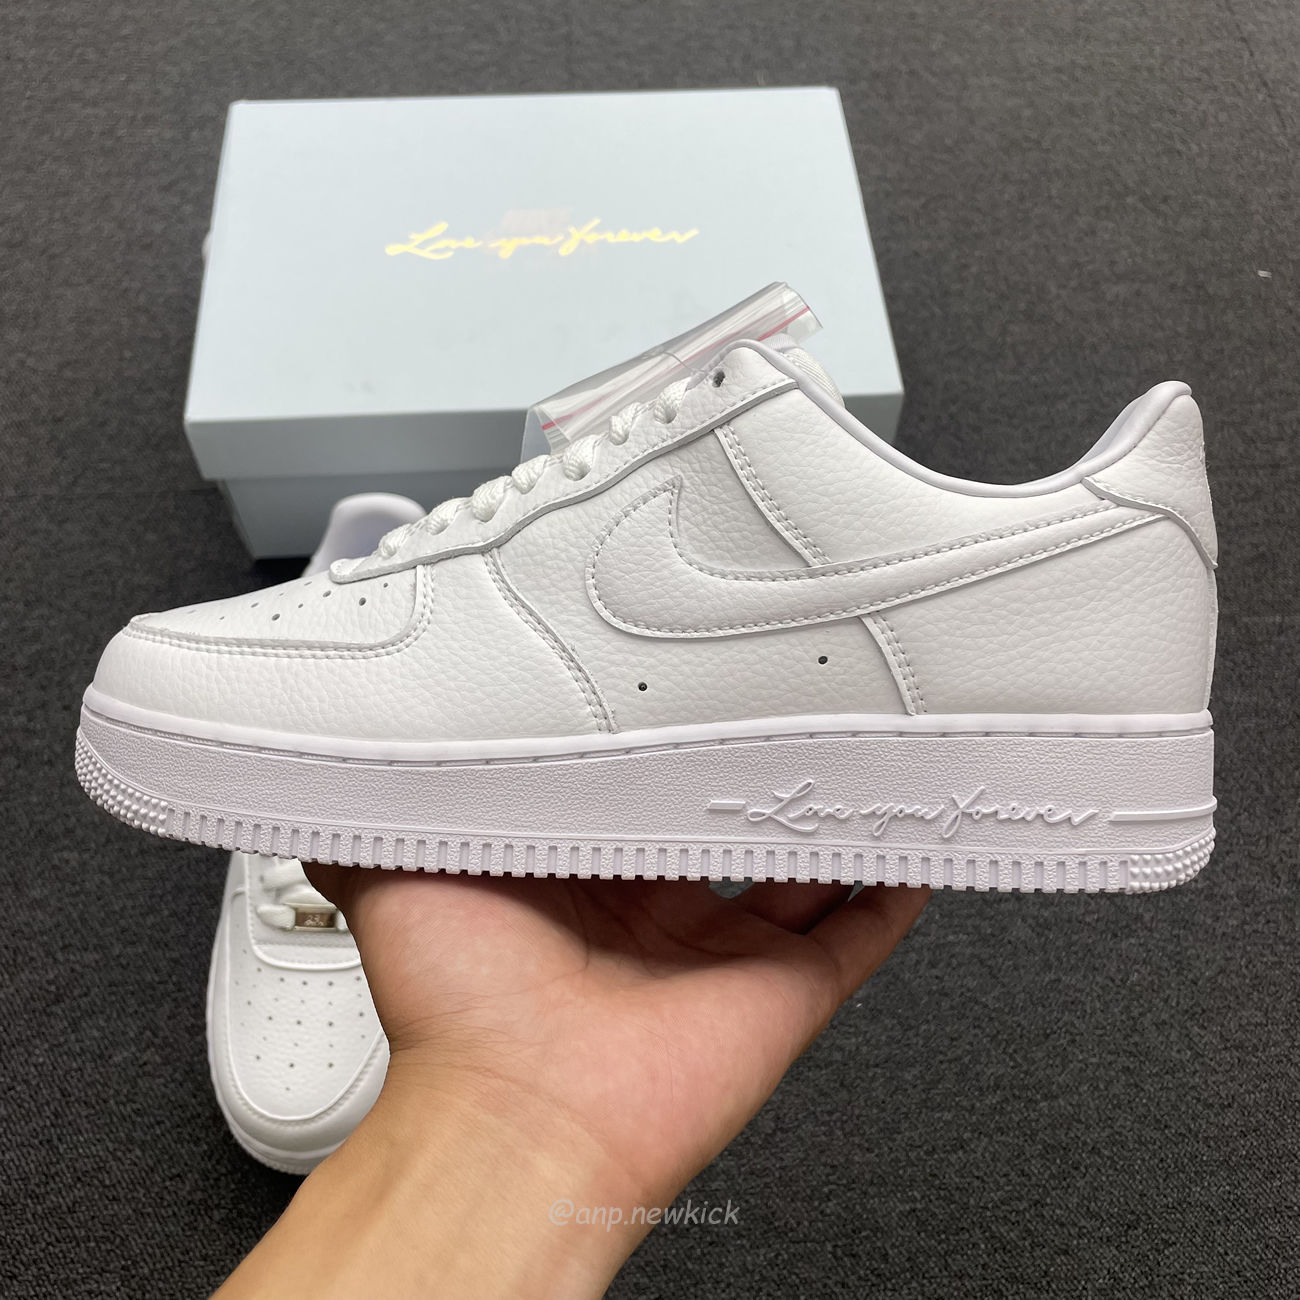 Nike Air Force 1 Low Drake Nocta Certified Lover Boy Cz8065 100 (10) - newkick.org